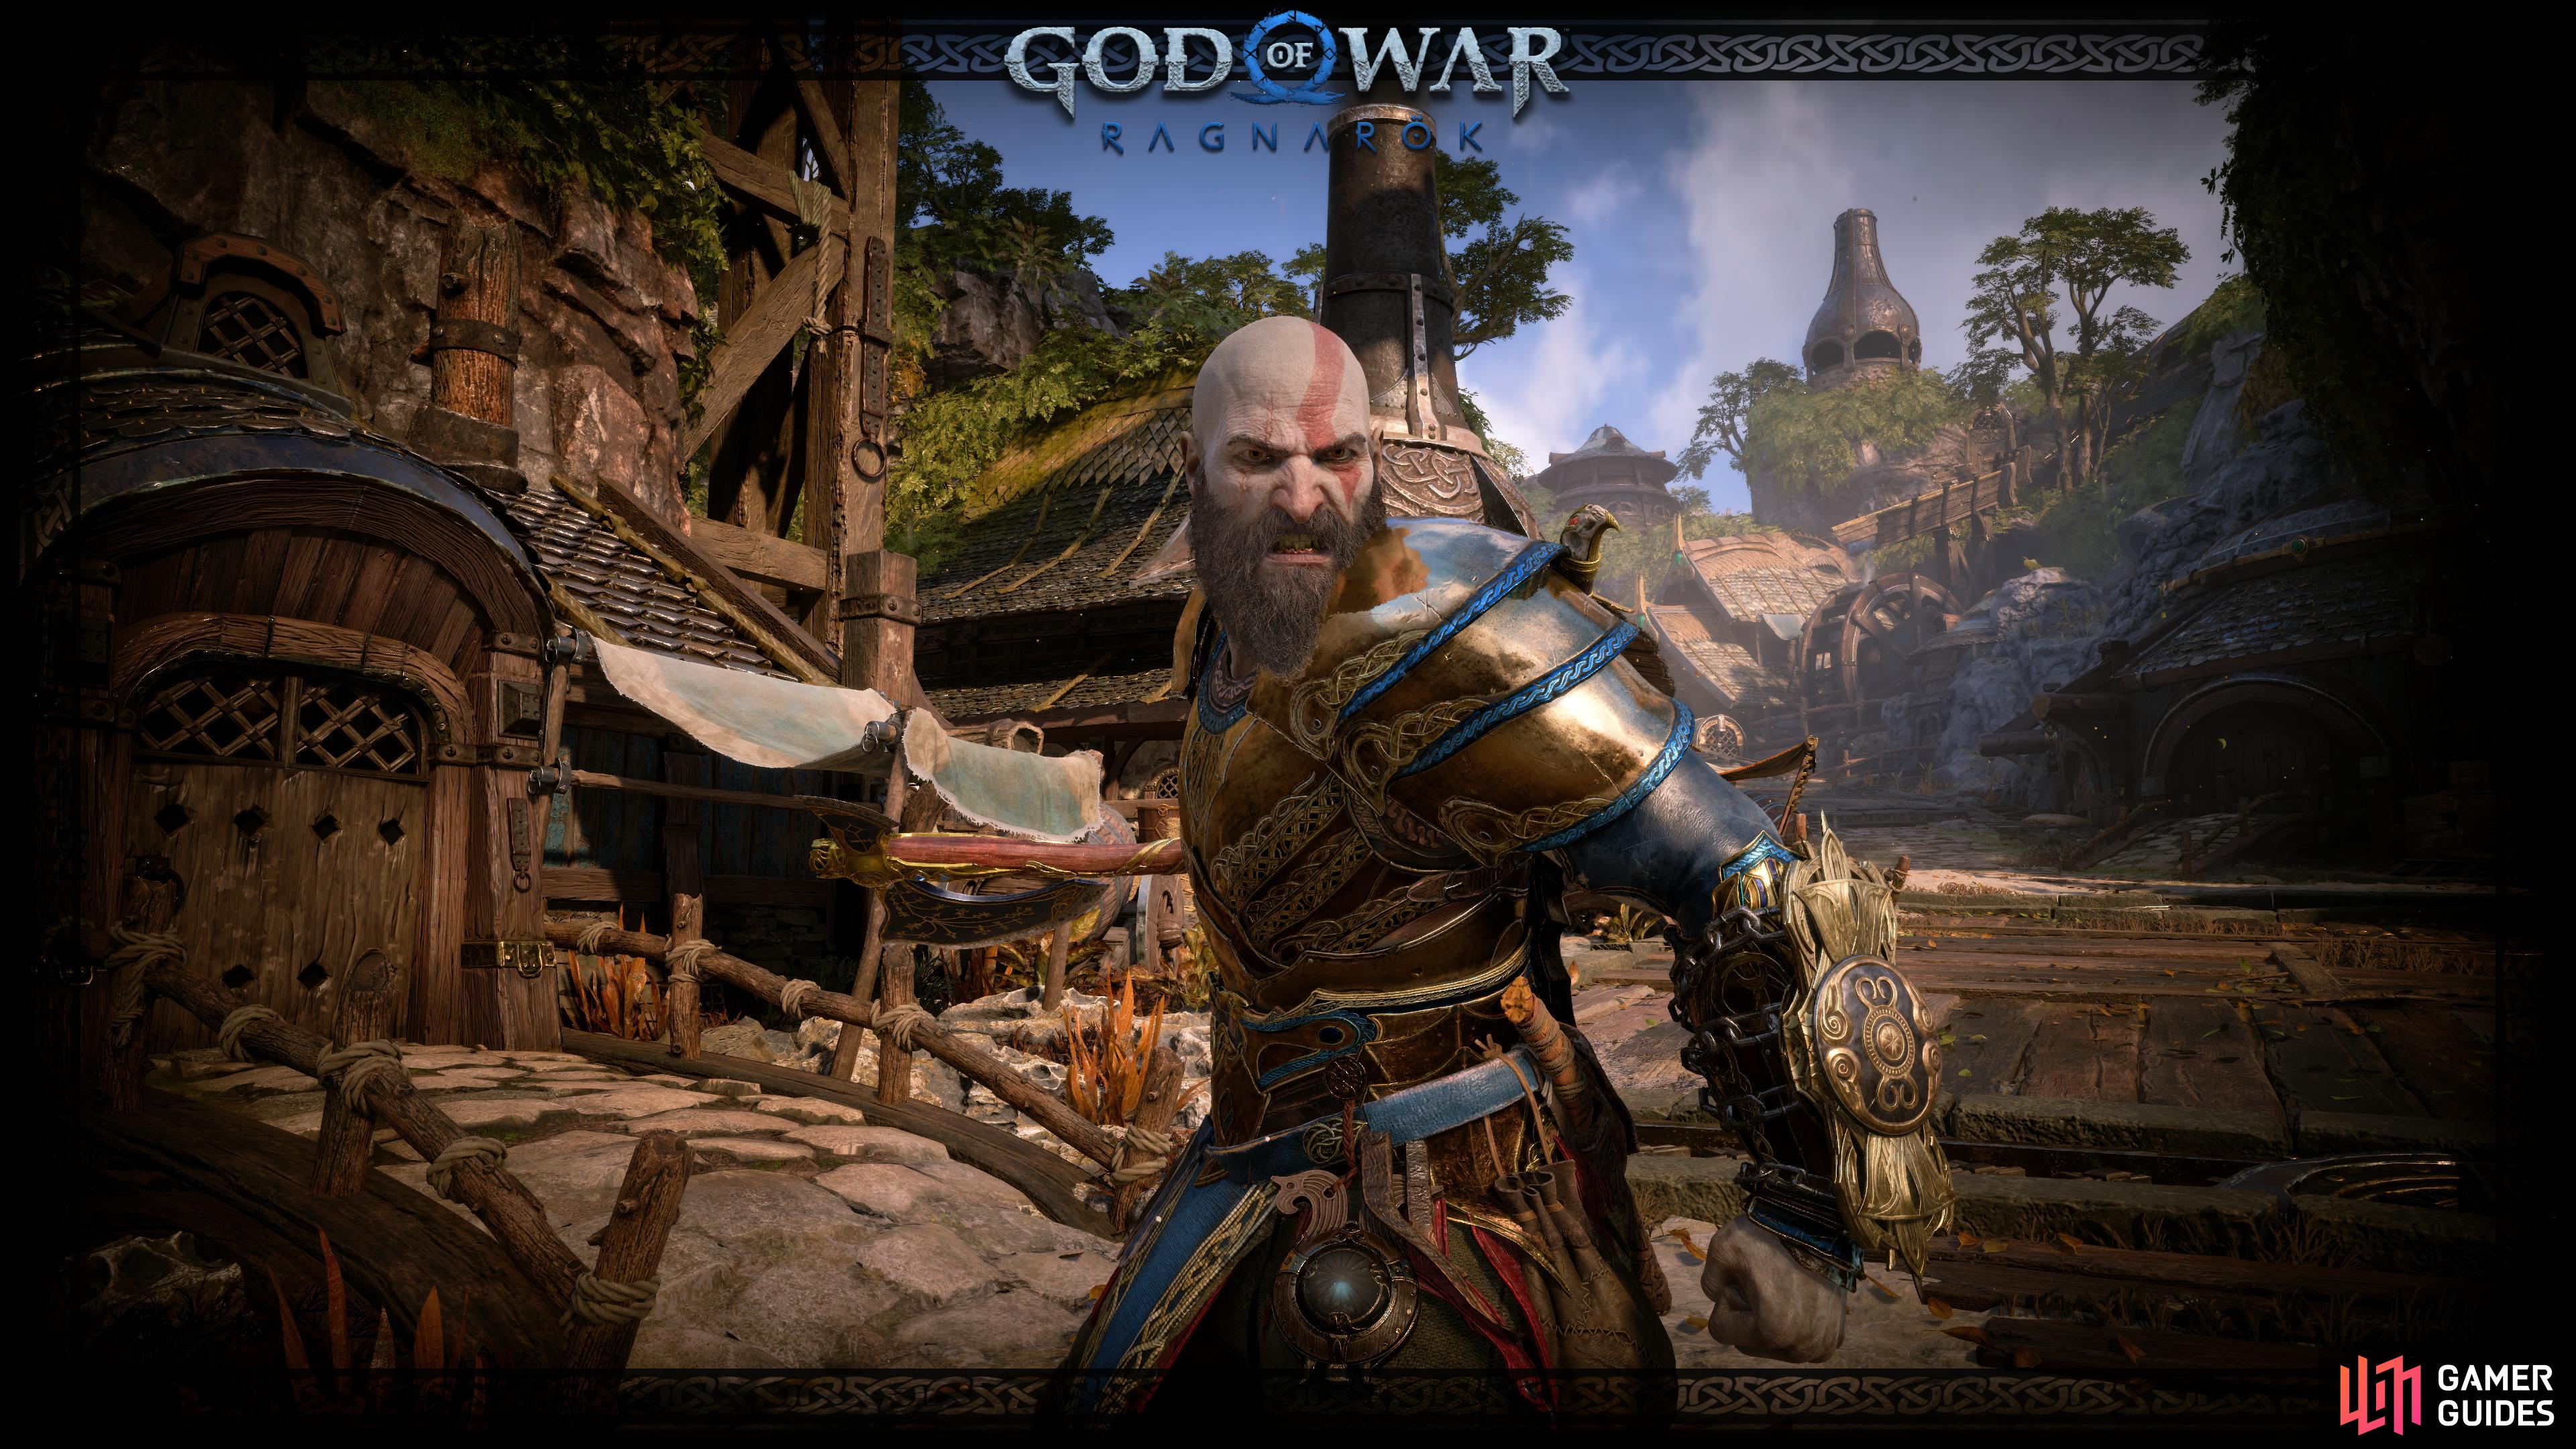 Creating Weapon Aspects Based on God of War Weapons - Sword, Spear